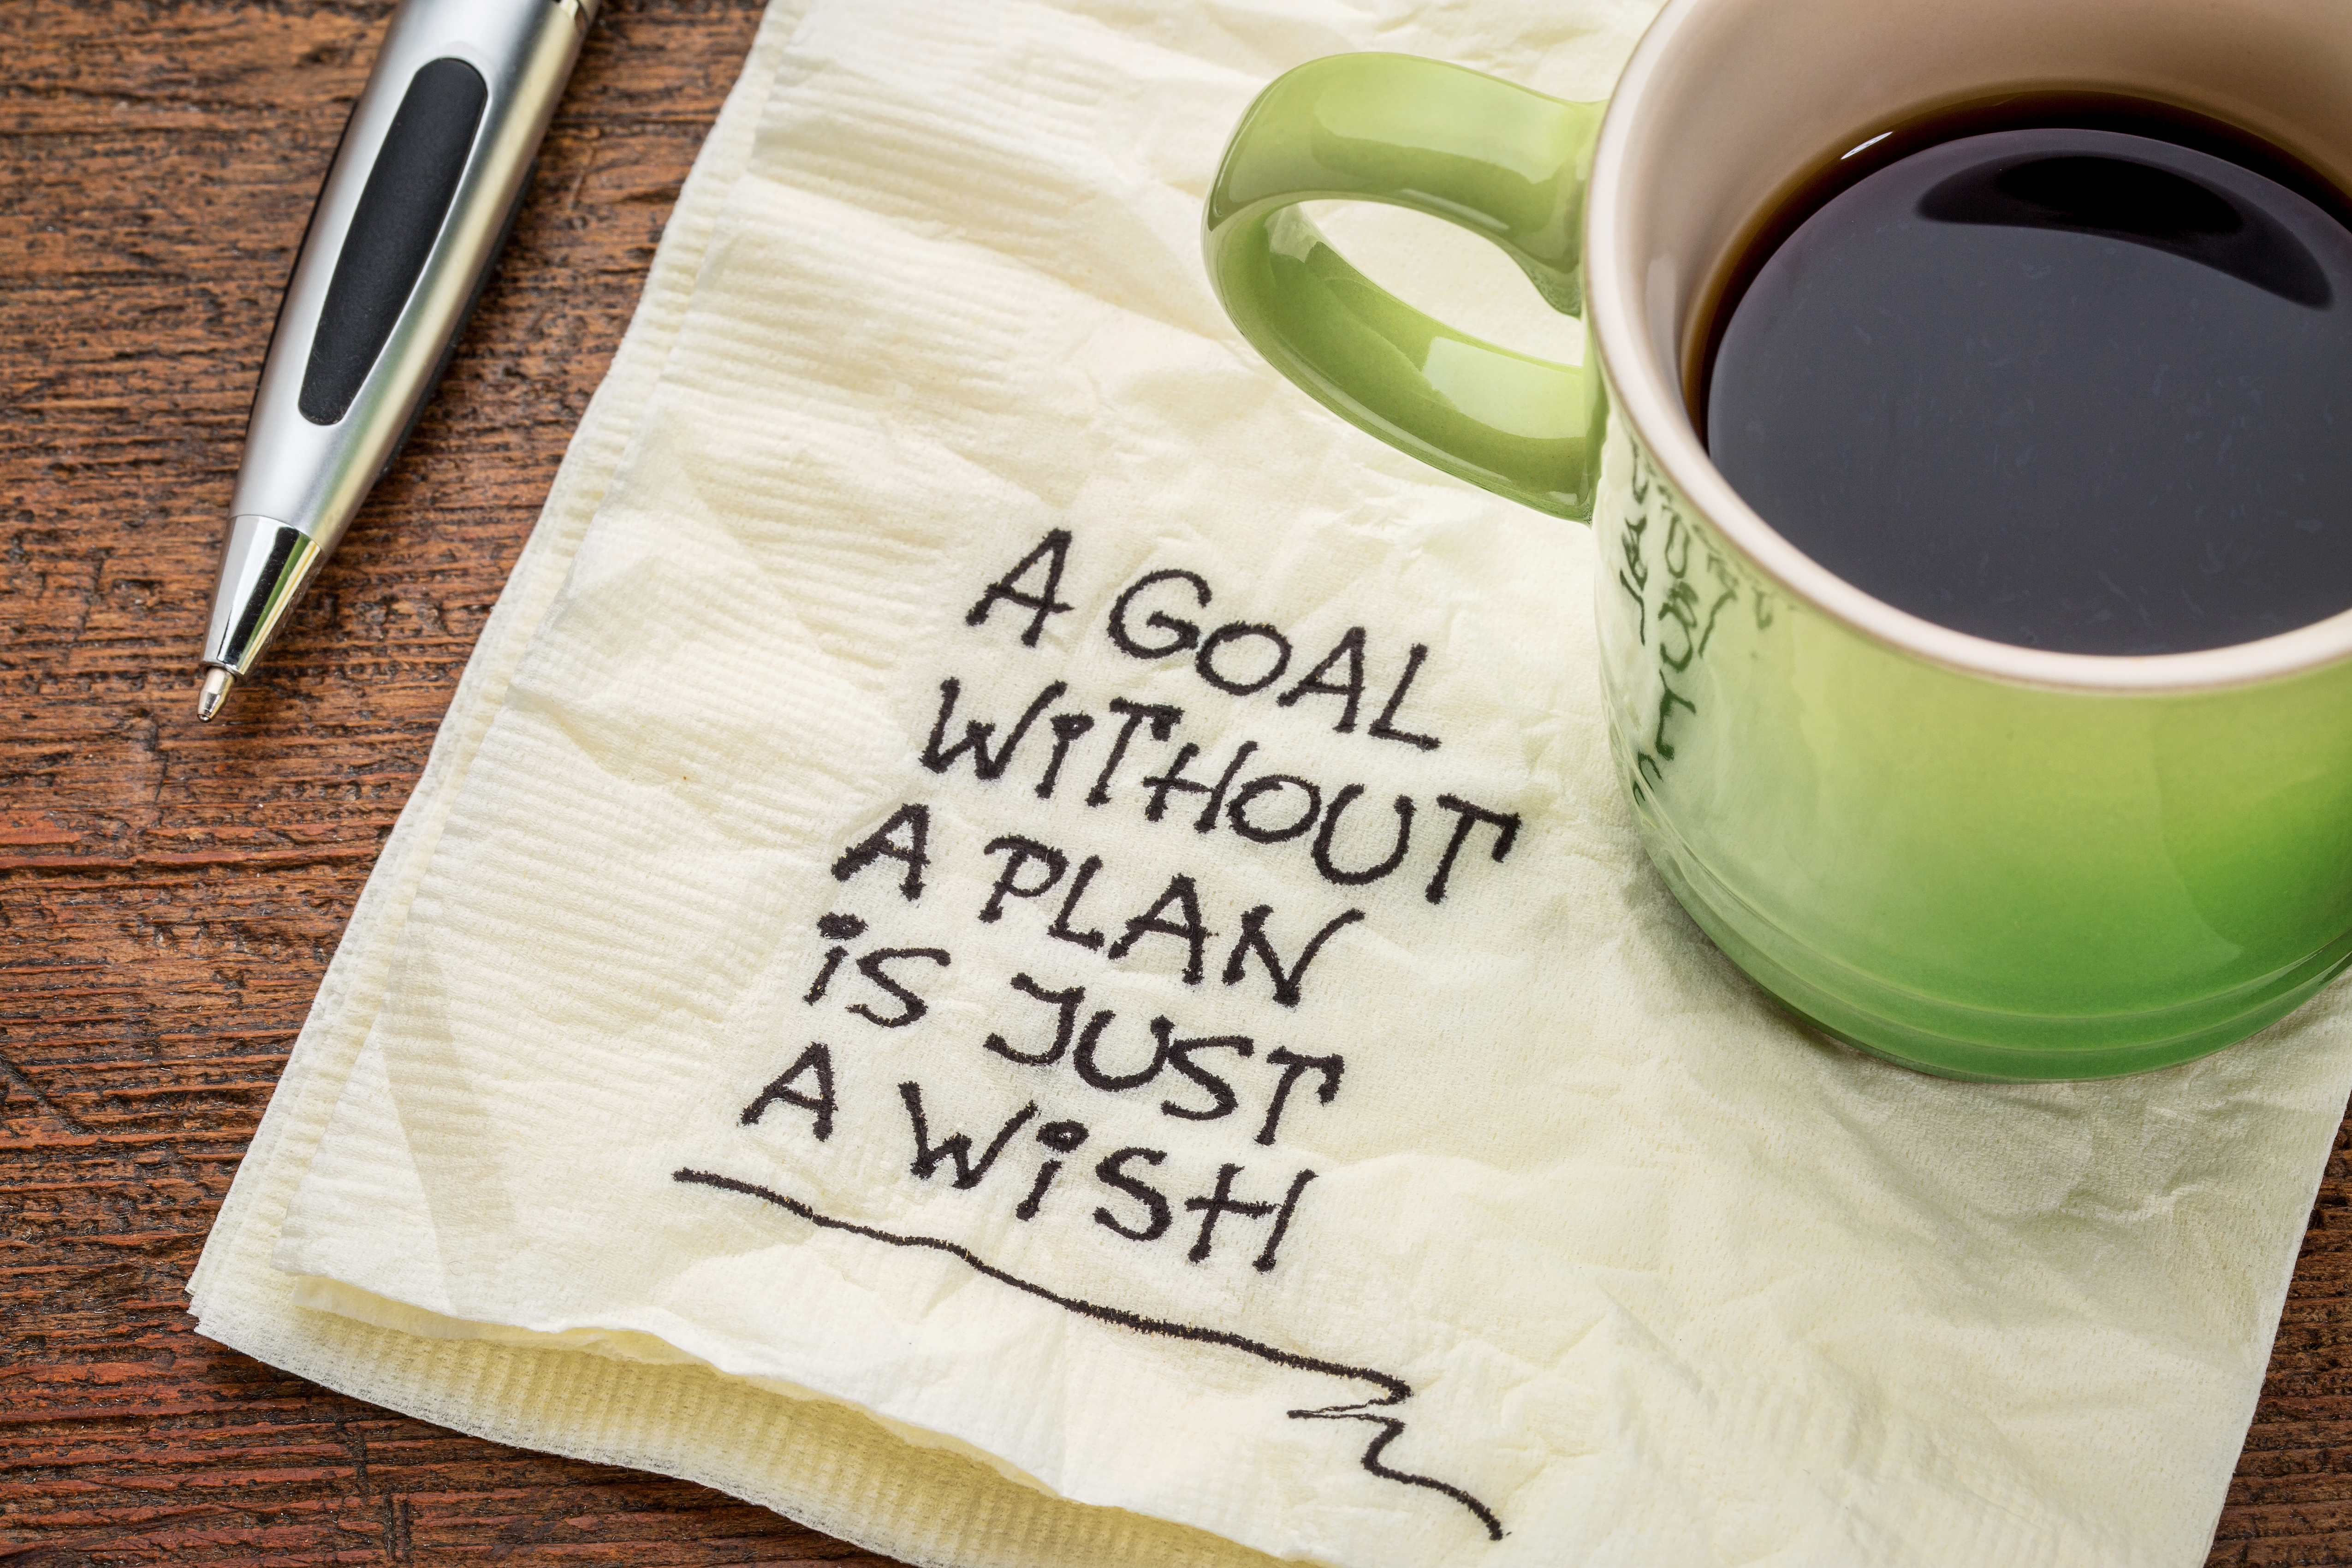 Setting Goals for your Business that Scare you